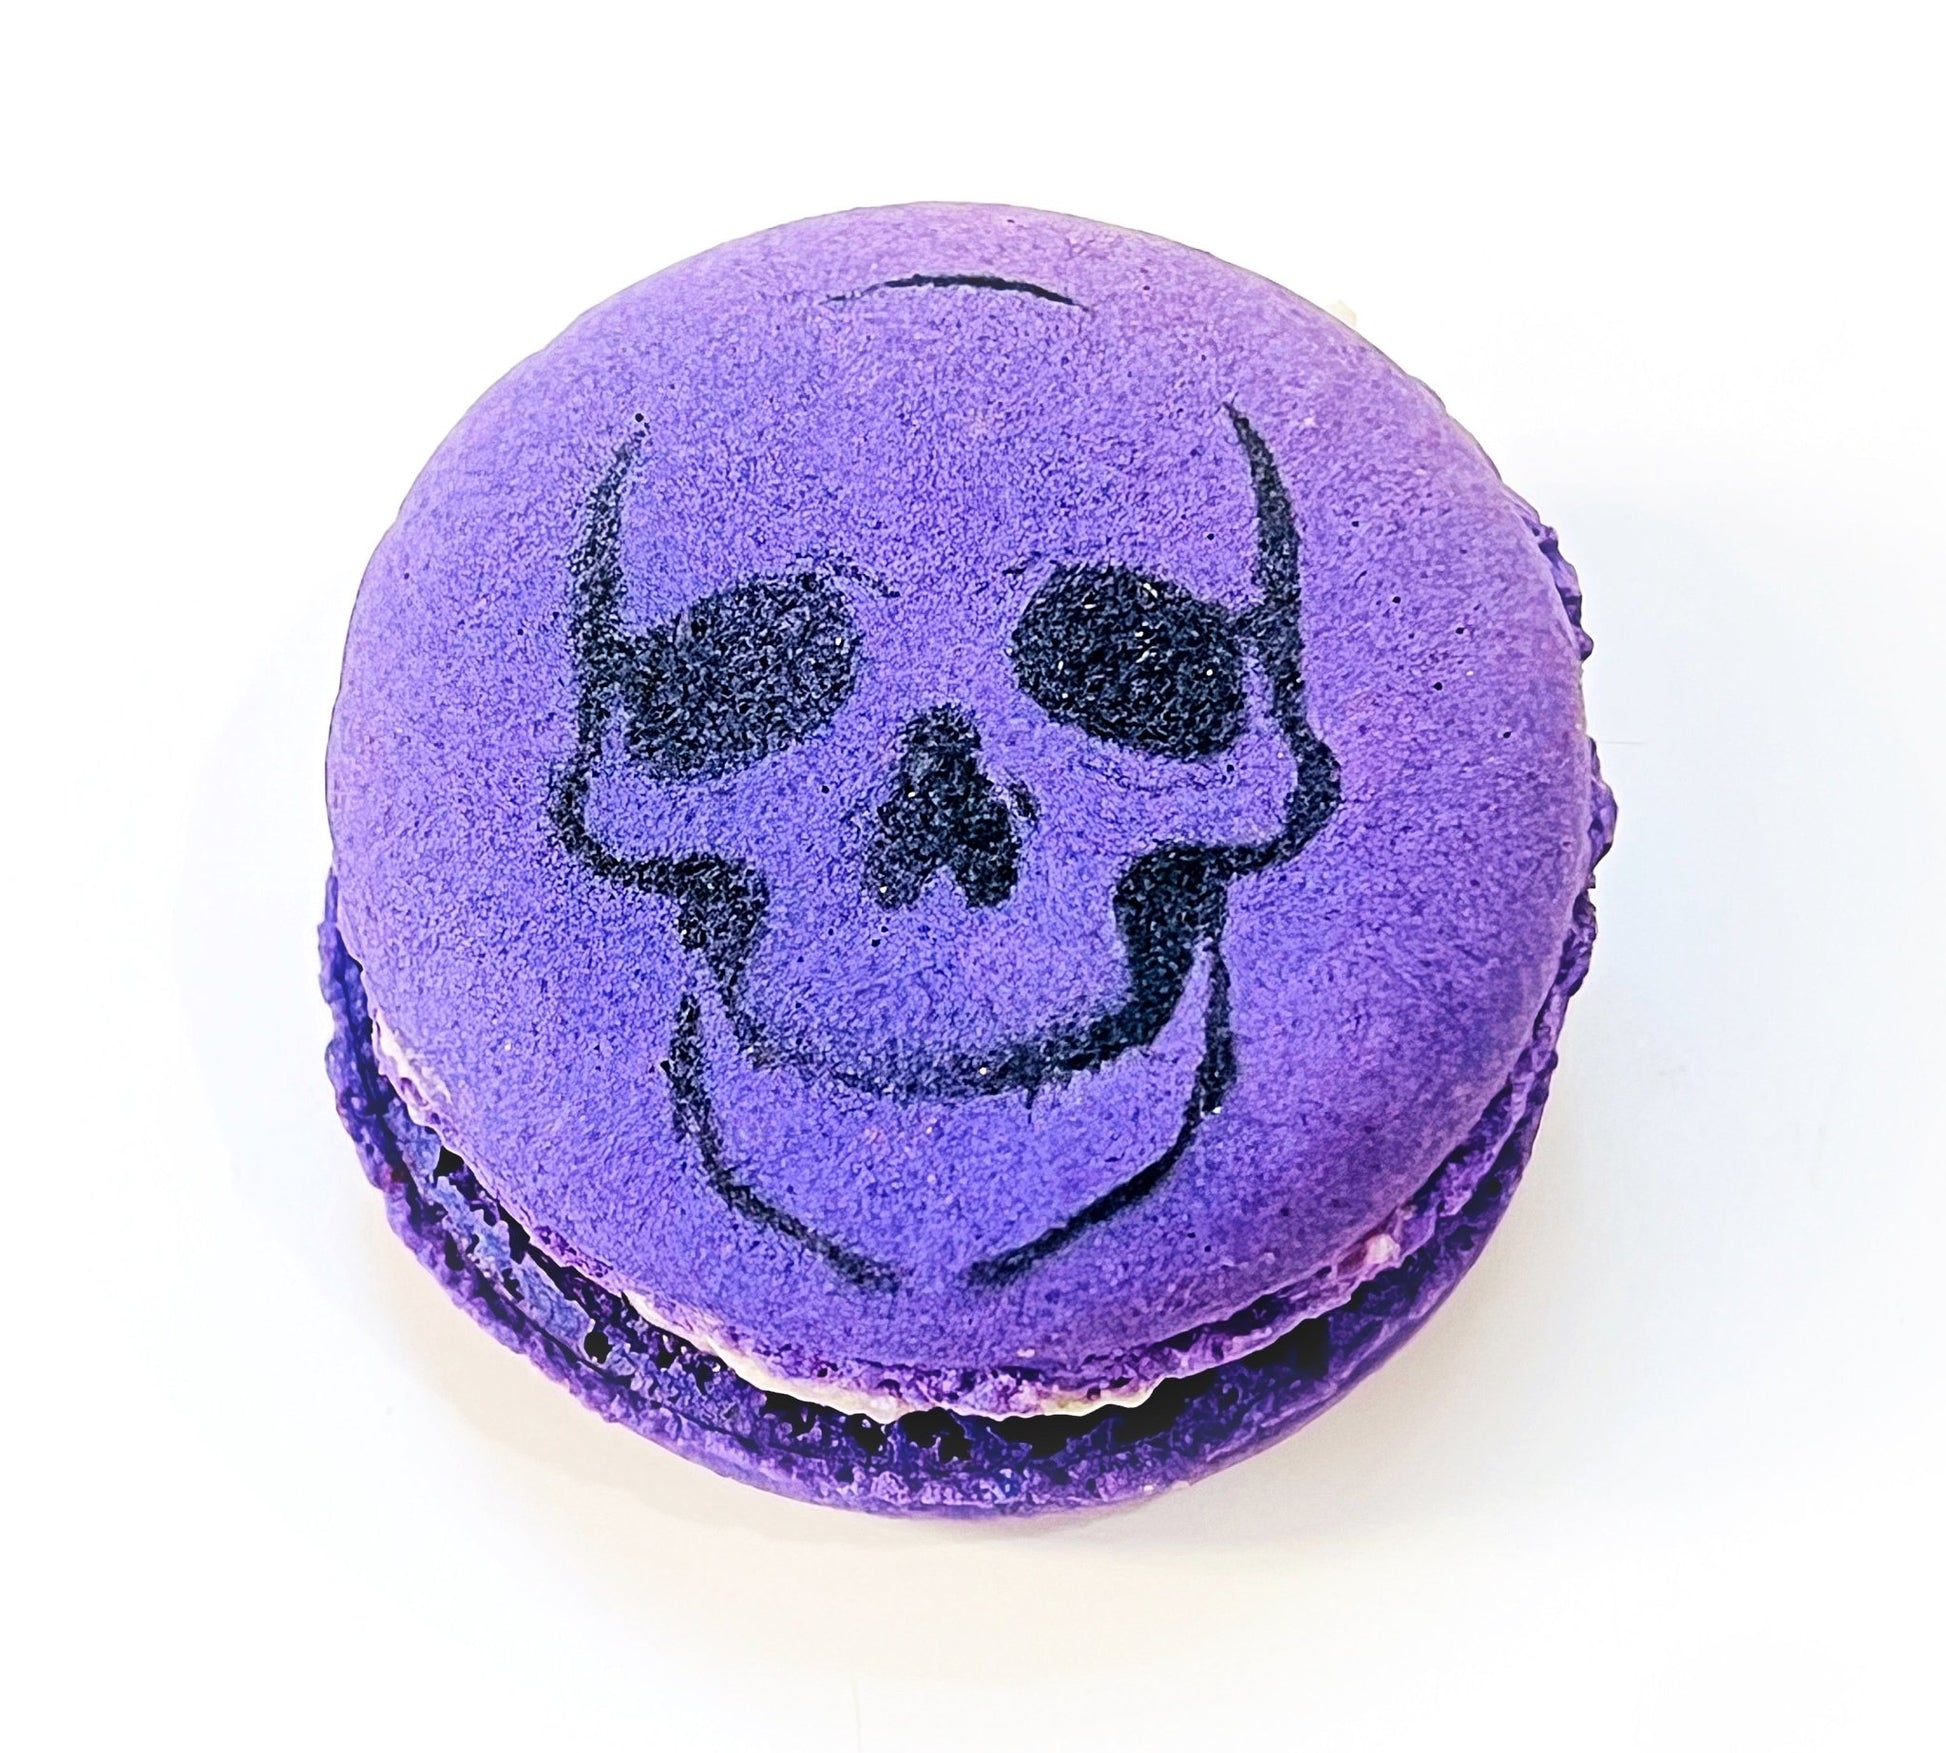 Skull French Macaron | Choose Your Favorite Flavors - Macaron Centrale6 PackGrape